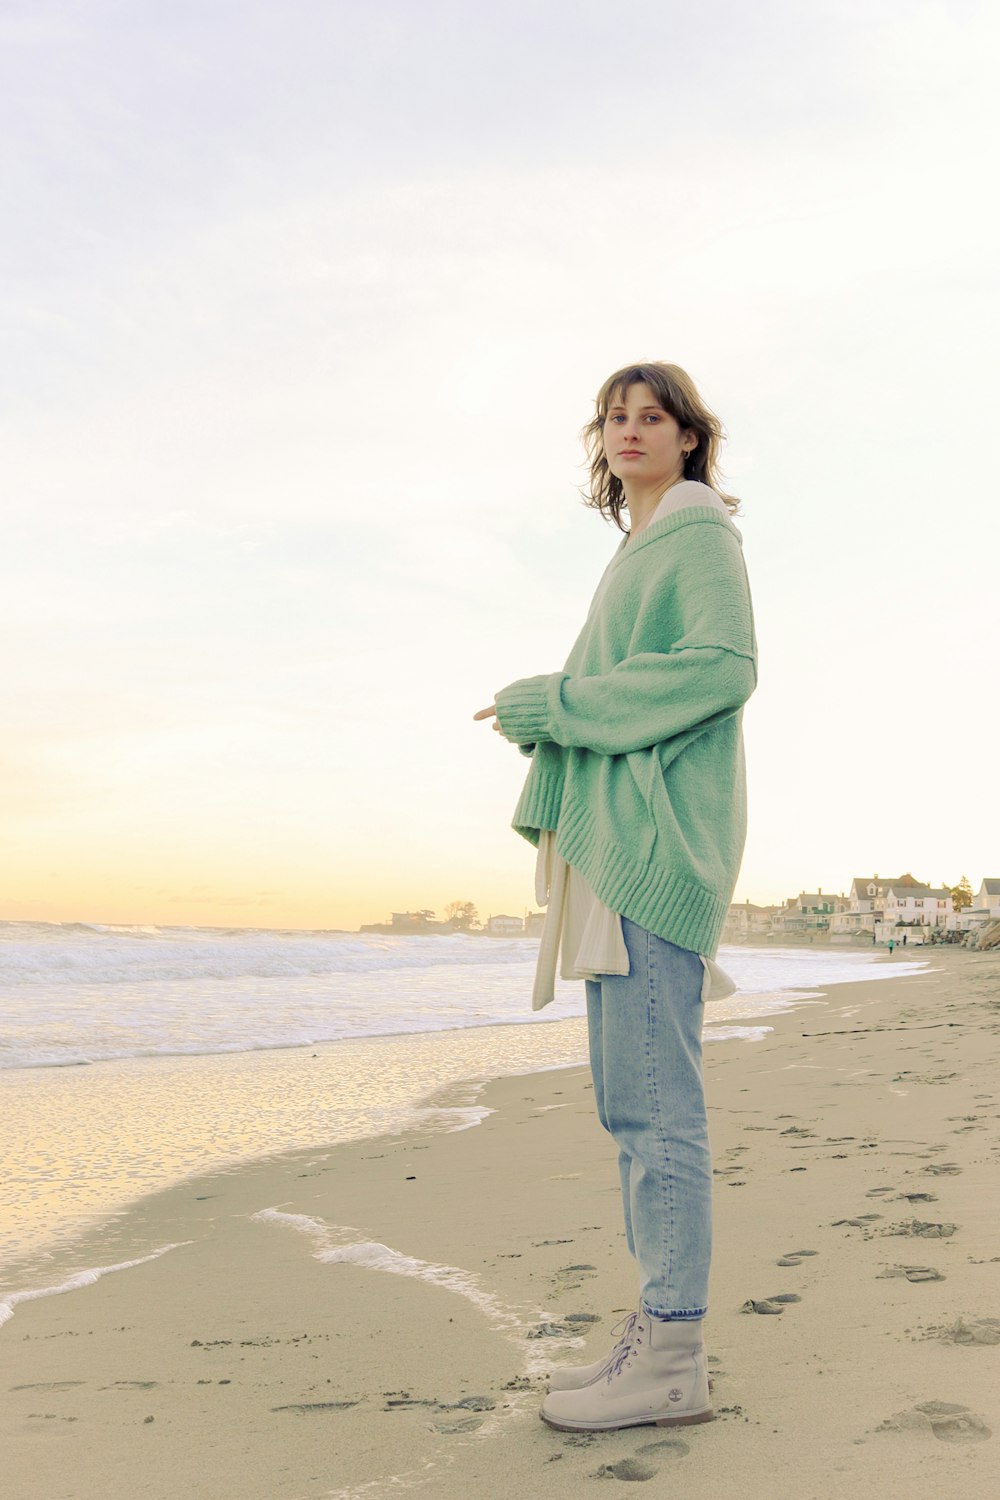 woman in green long sleeve shirt and blue denim jeans standing on beach during daytime